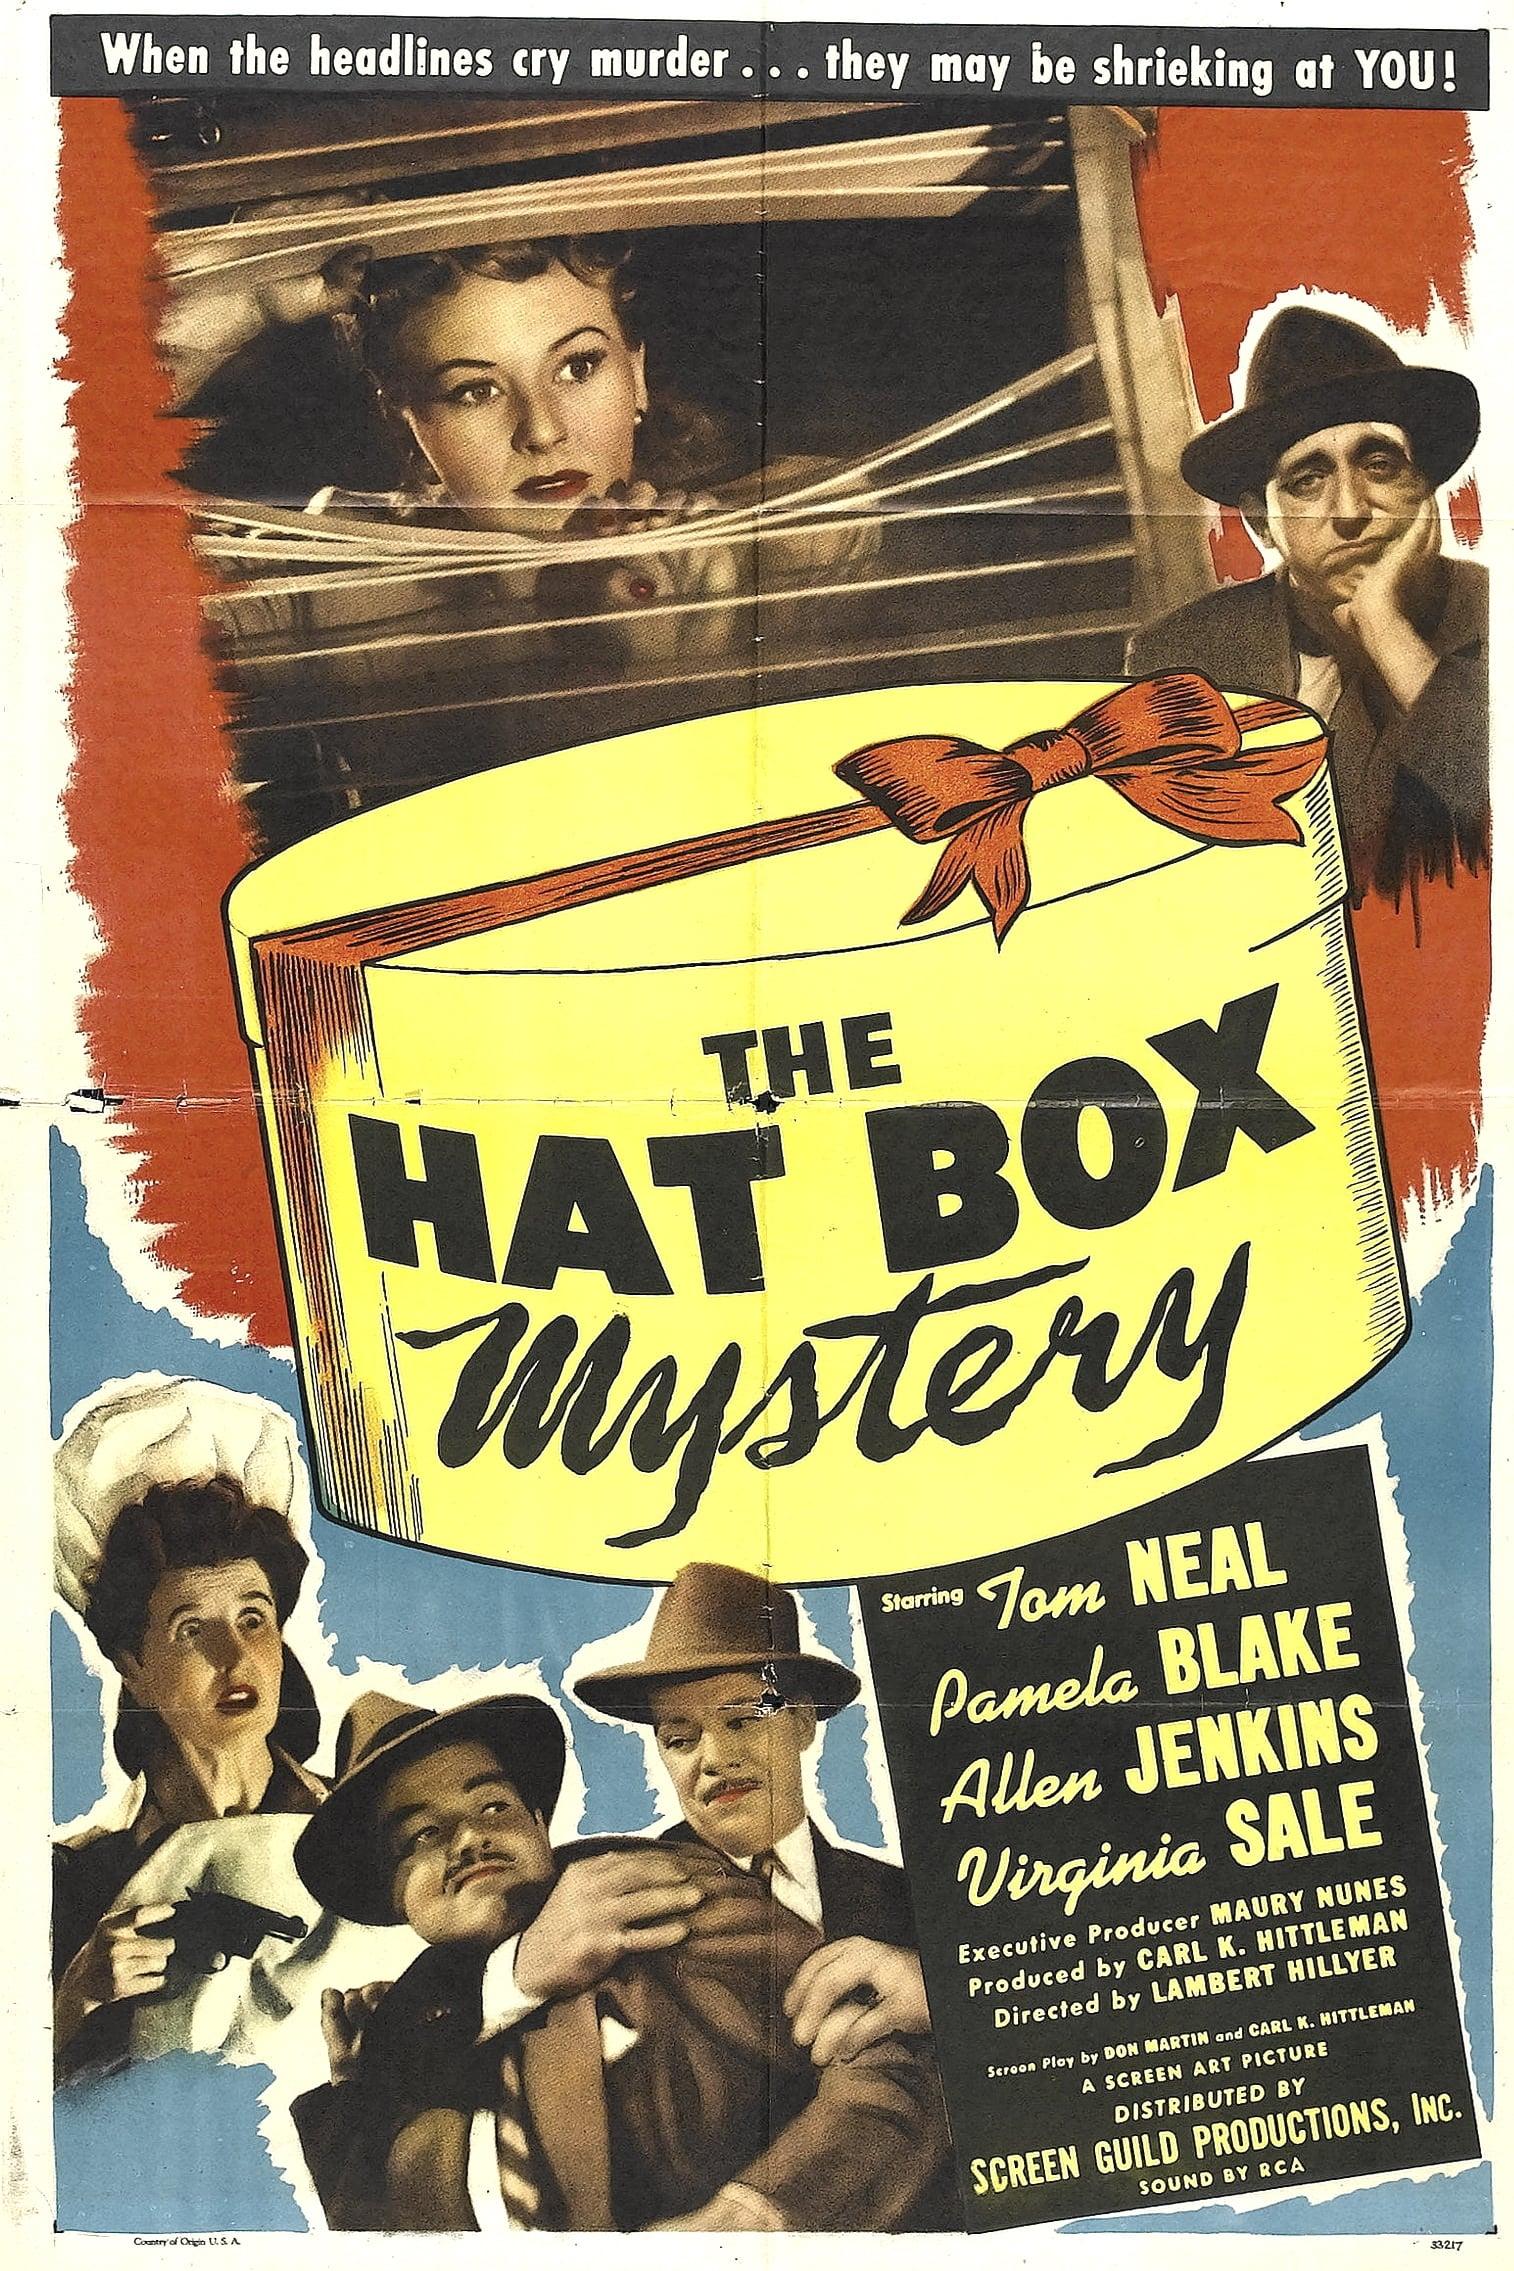 The Hat Box Mystery poster